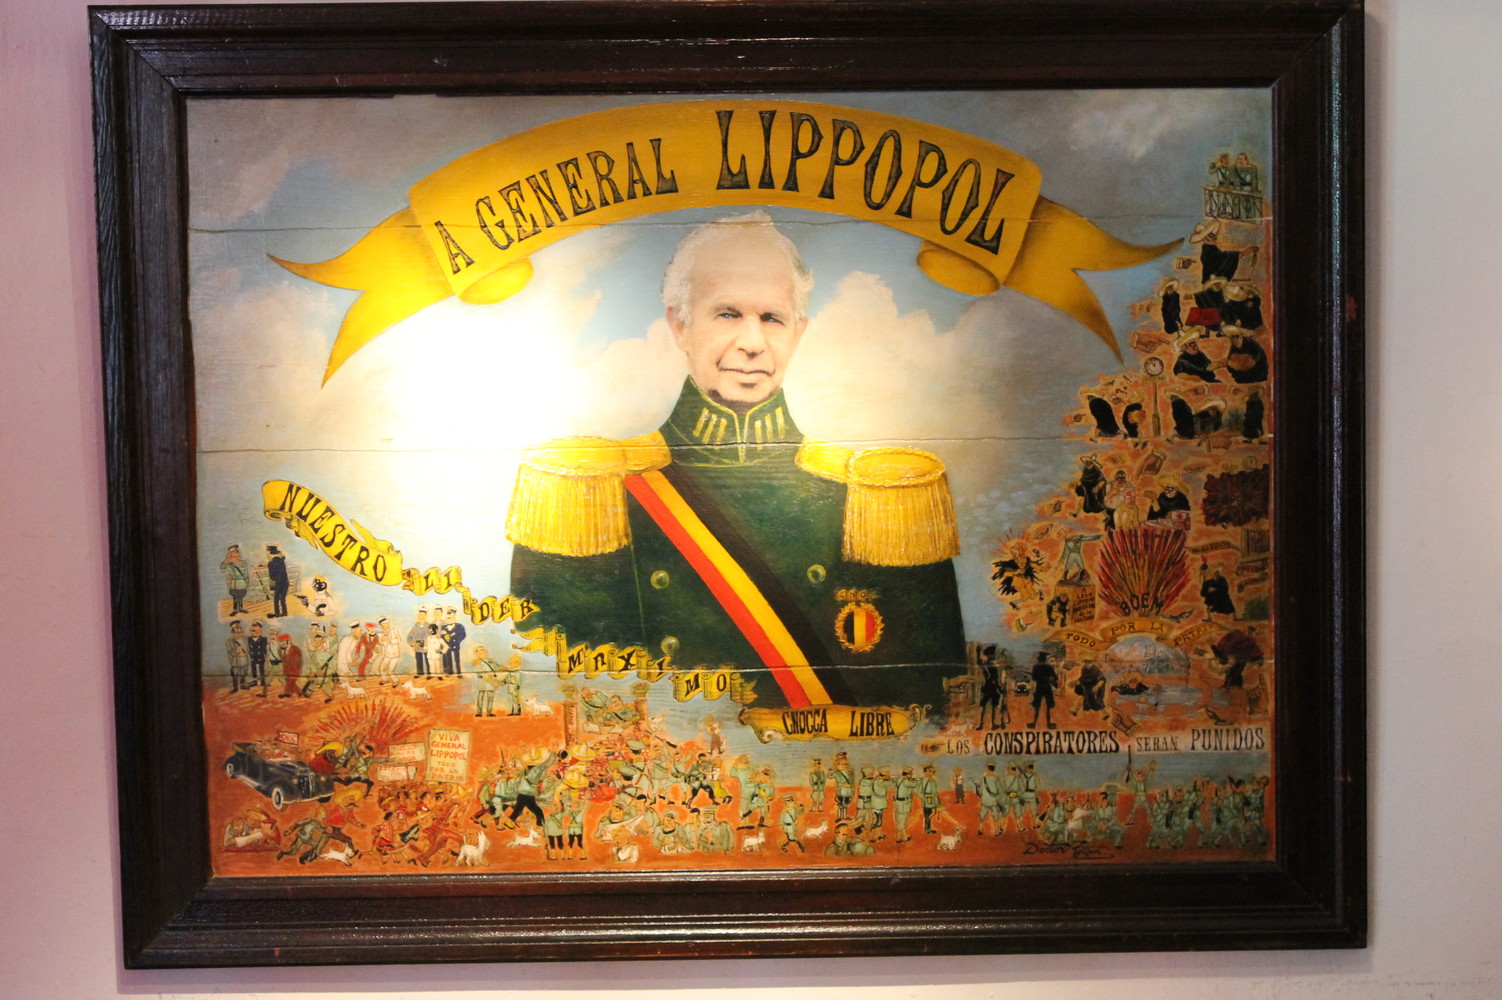 'A General Lippopol' Painting Leopold Lippens 'oil on panel'